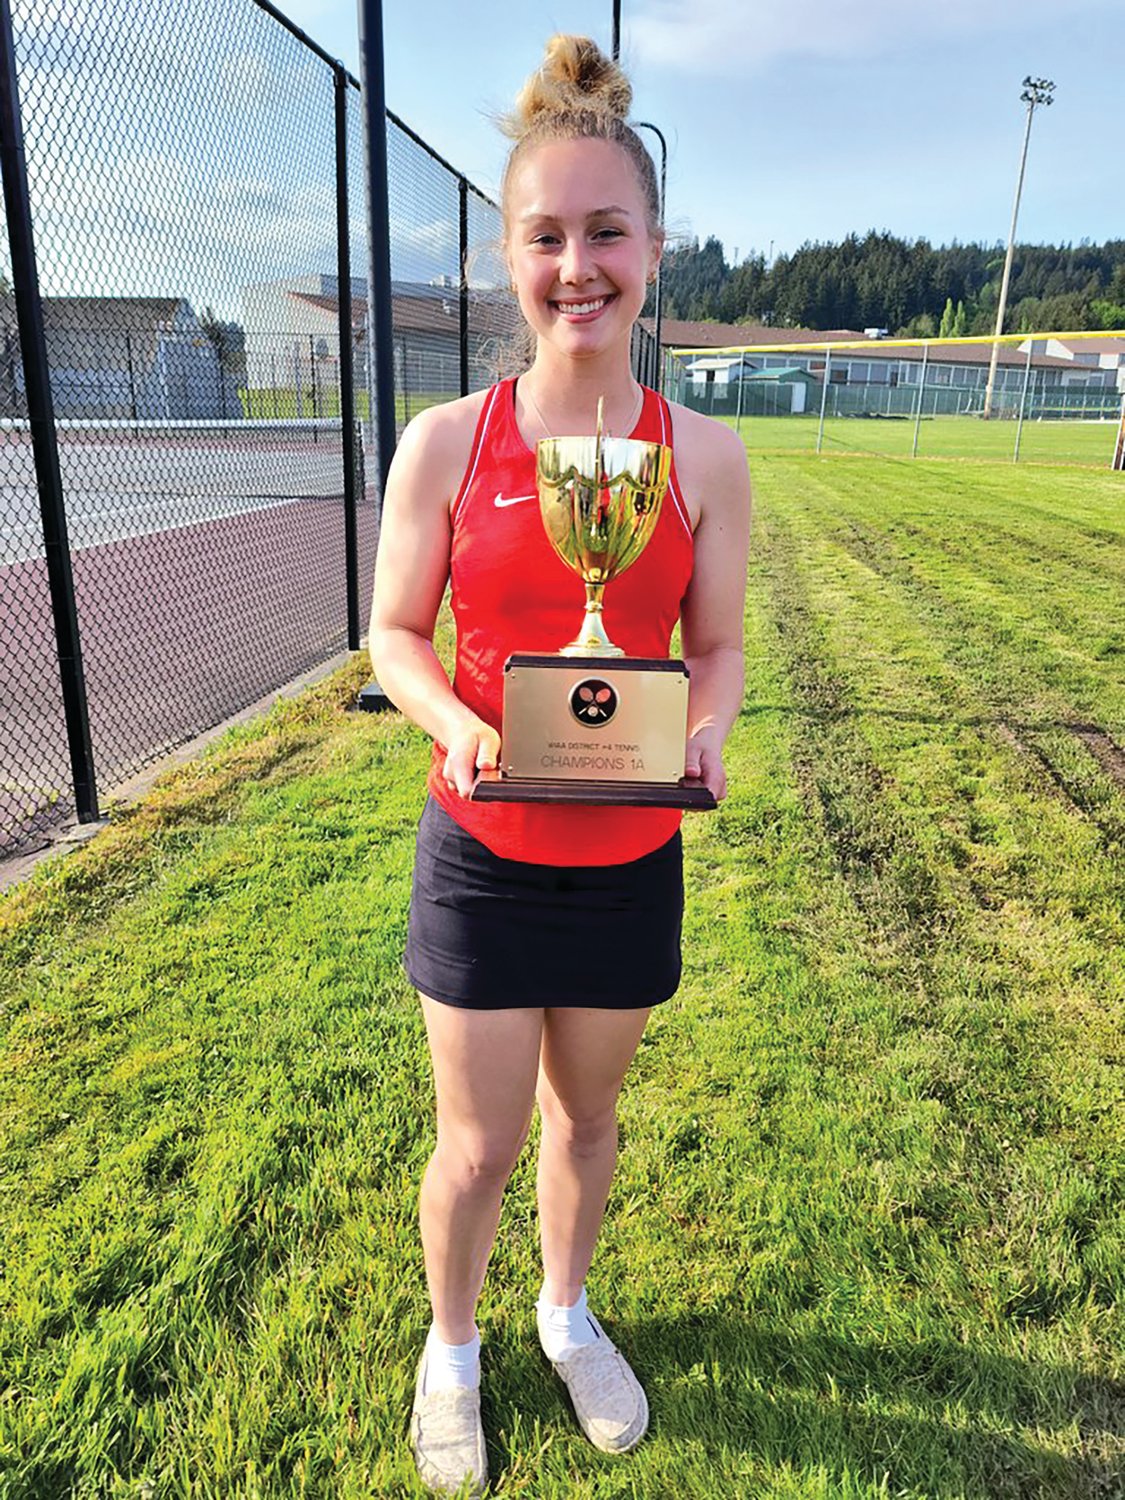 Megan Letts poses for a photo after winning the singles championship at the 1A District 4 girls tennis tournament at W.F. West High School in Chehalis on Tuesday.